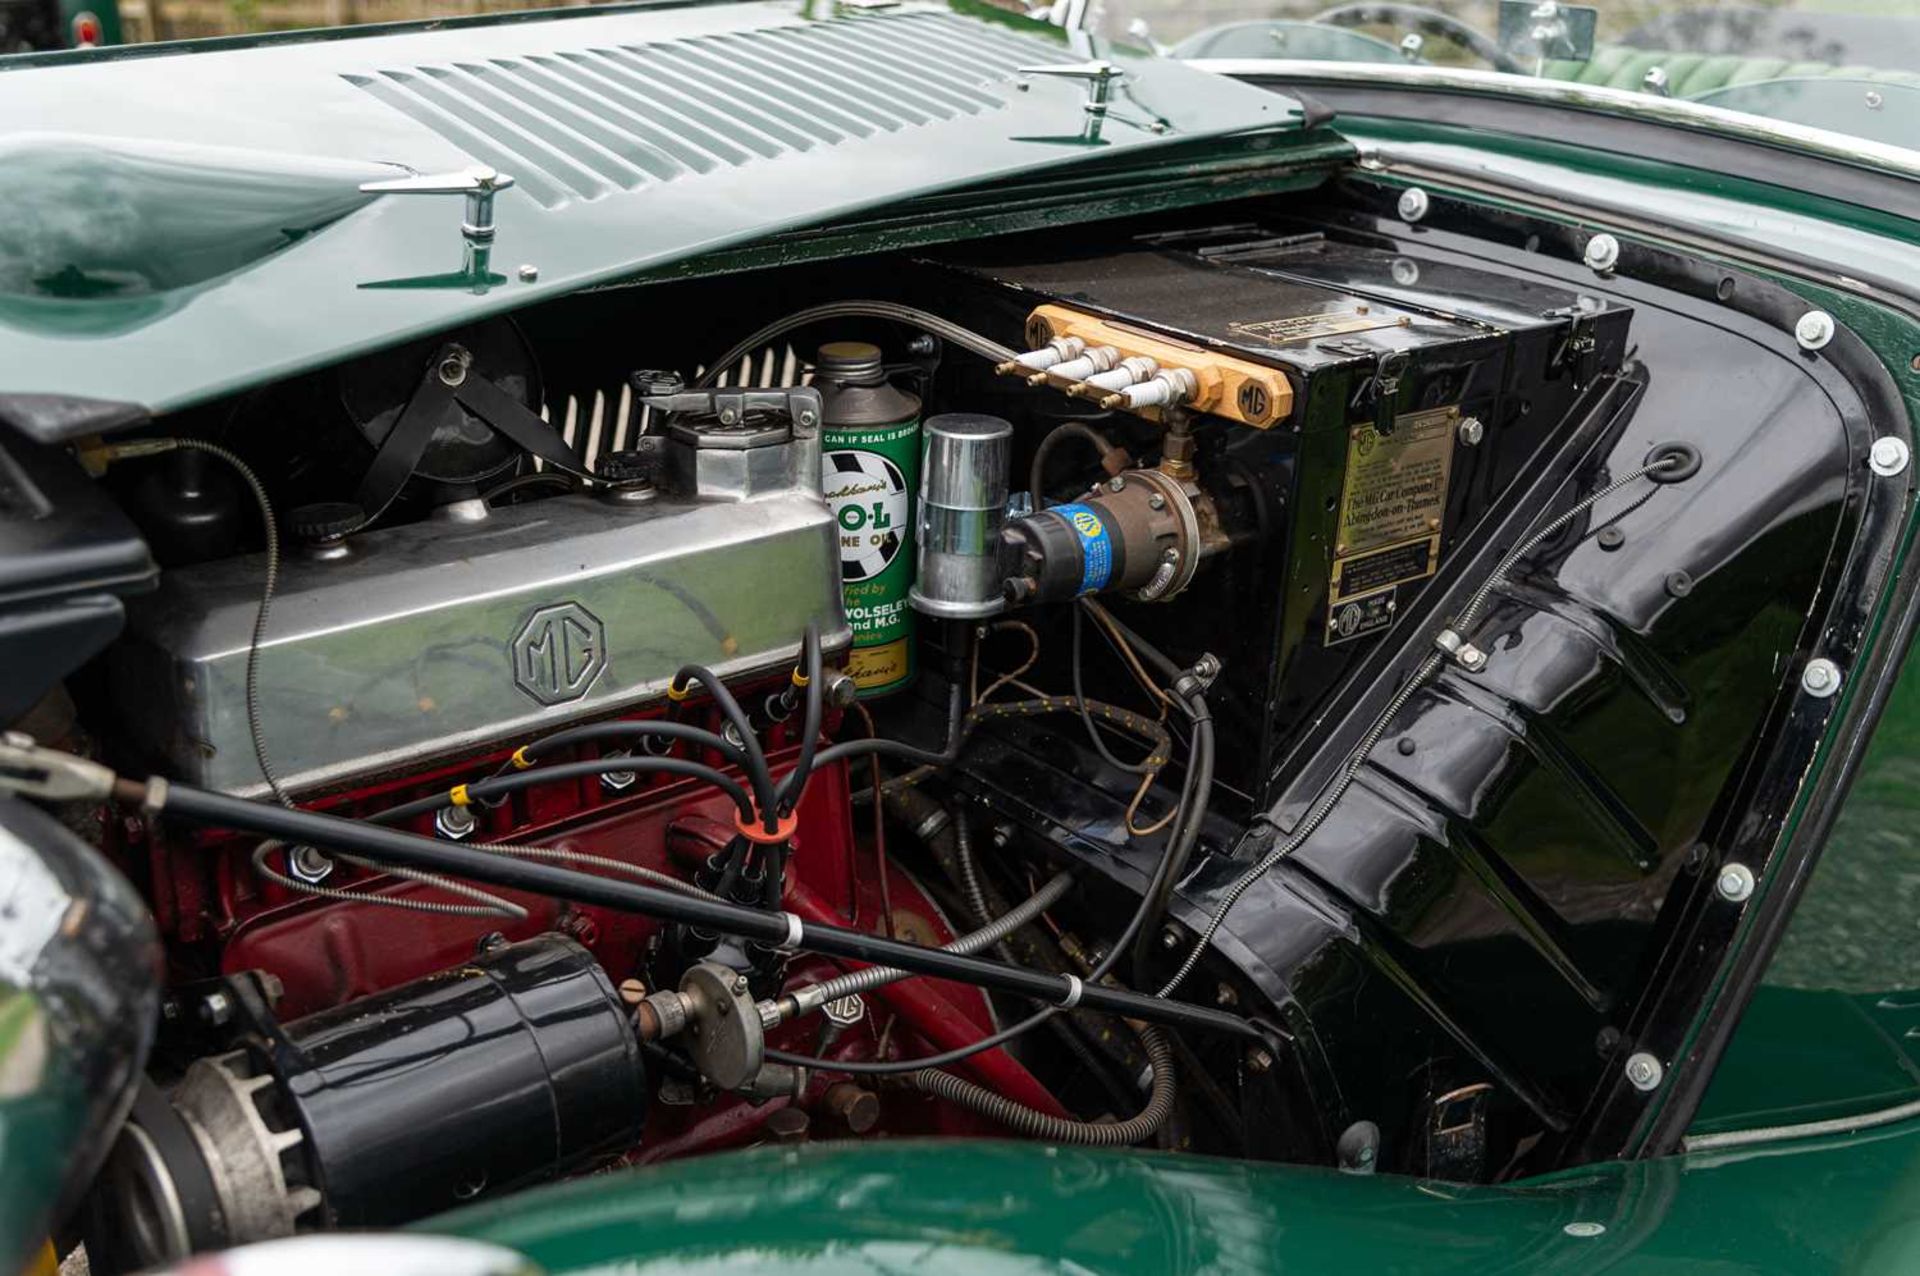 1947 MG TC Midget  Fully restored, right-hand-drive UK home market example - Image 66 of 76